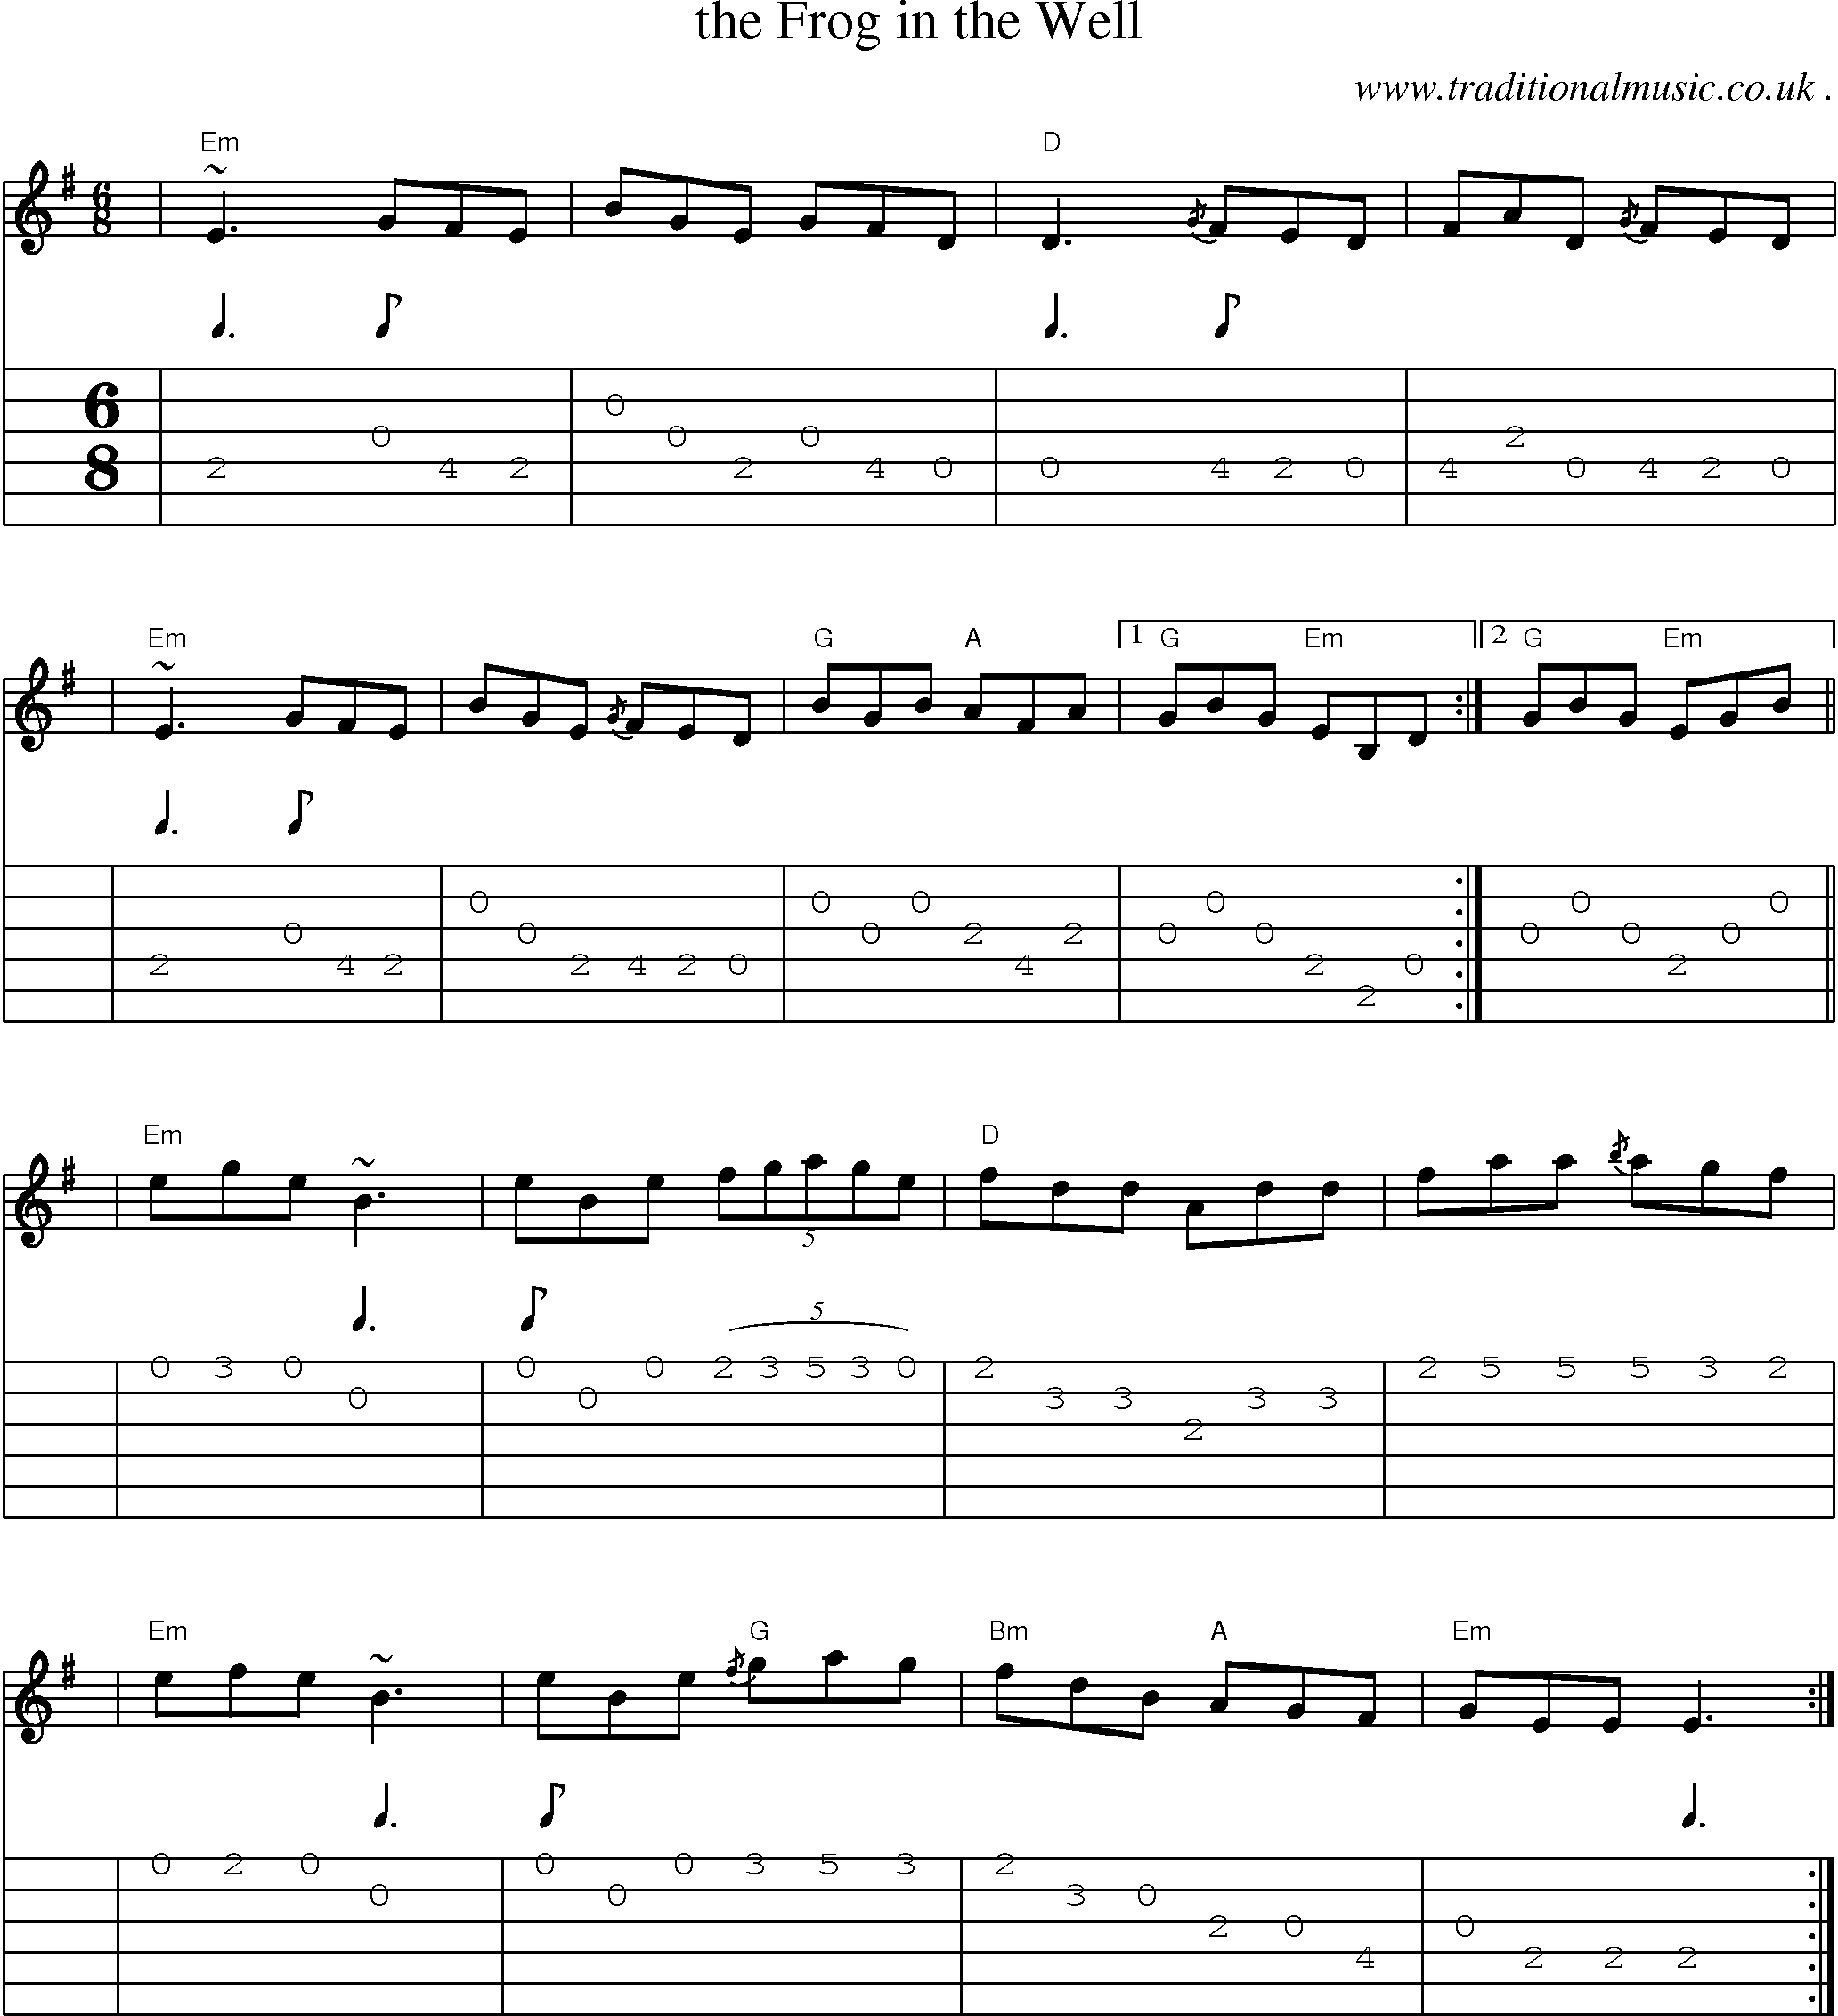 Sheet-music  score, Chords and Guitar Tabs for The Frog In The Well